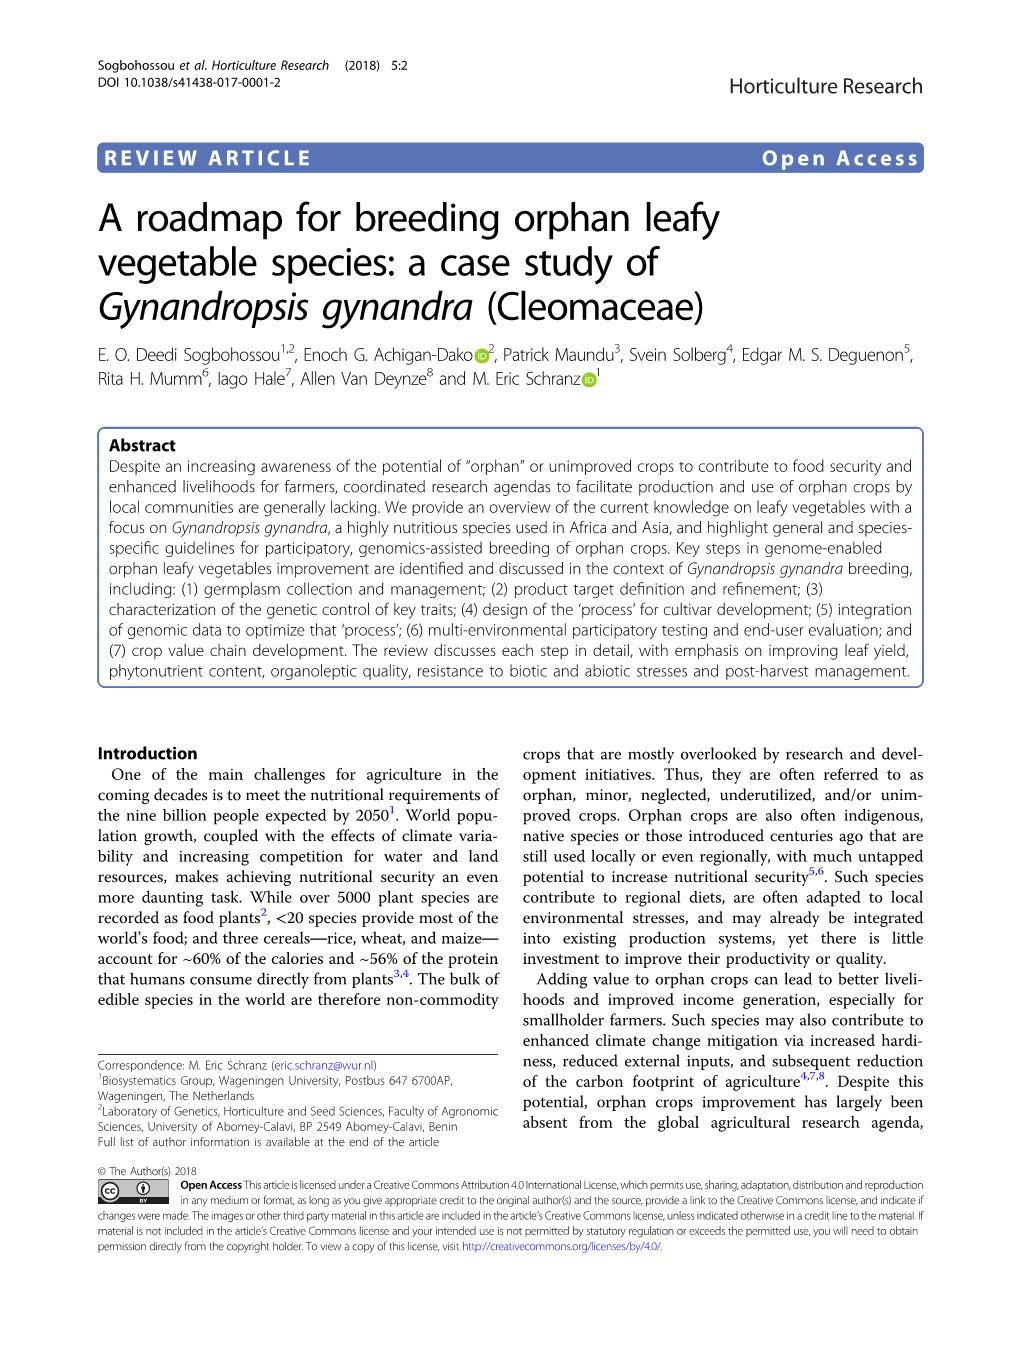 A Roadmap for Breeding Orphan Leafy Vegetable Species